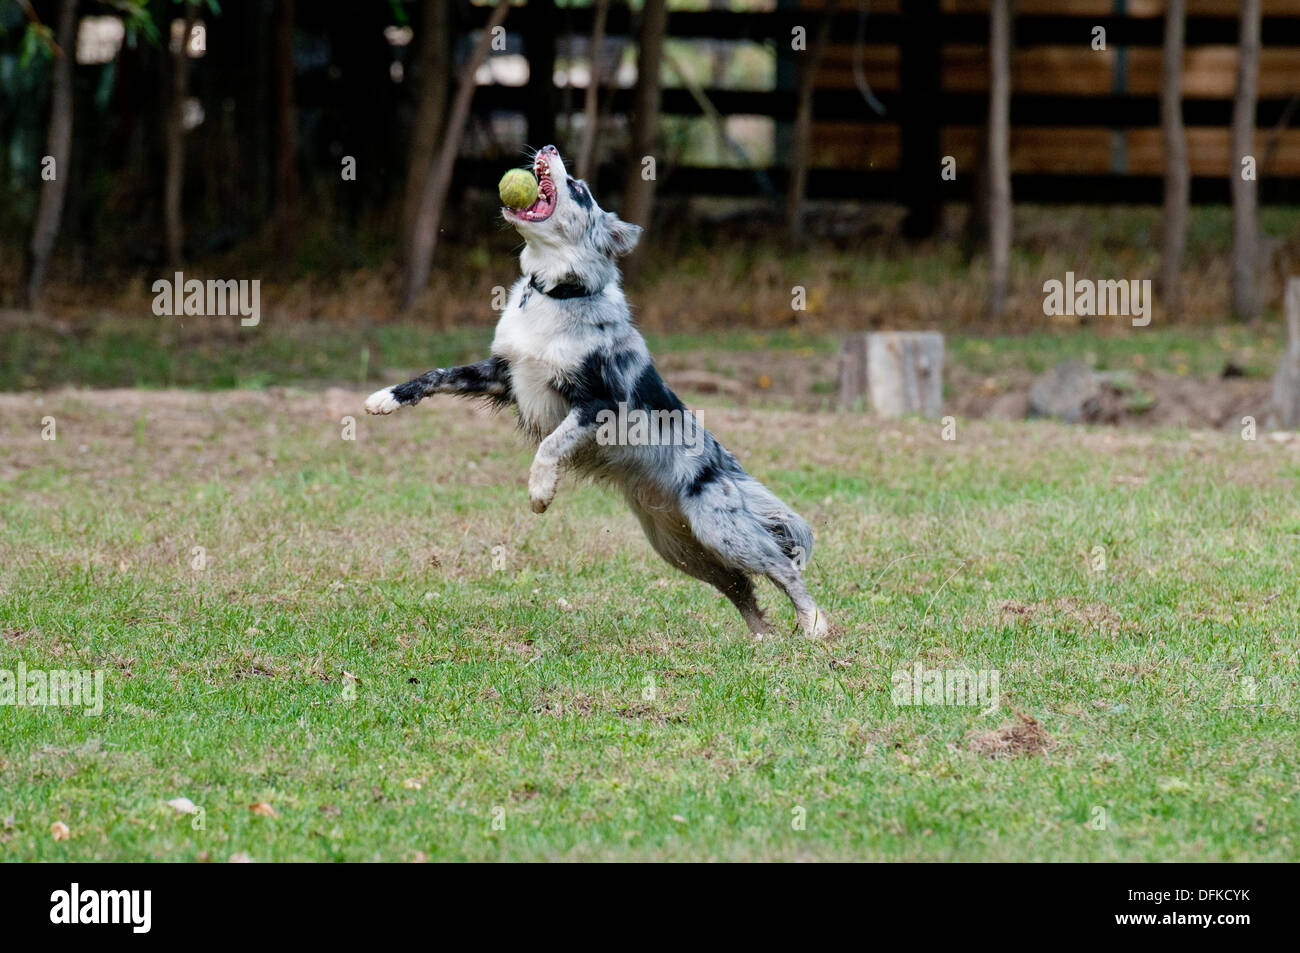 Border collie catching a tennis ball Stock Photo